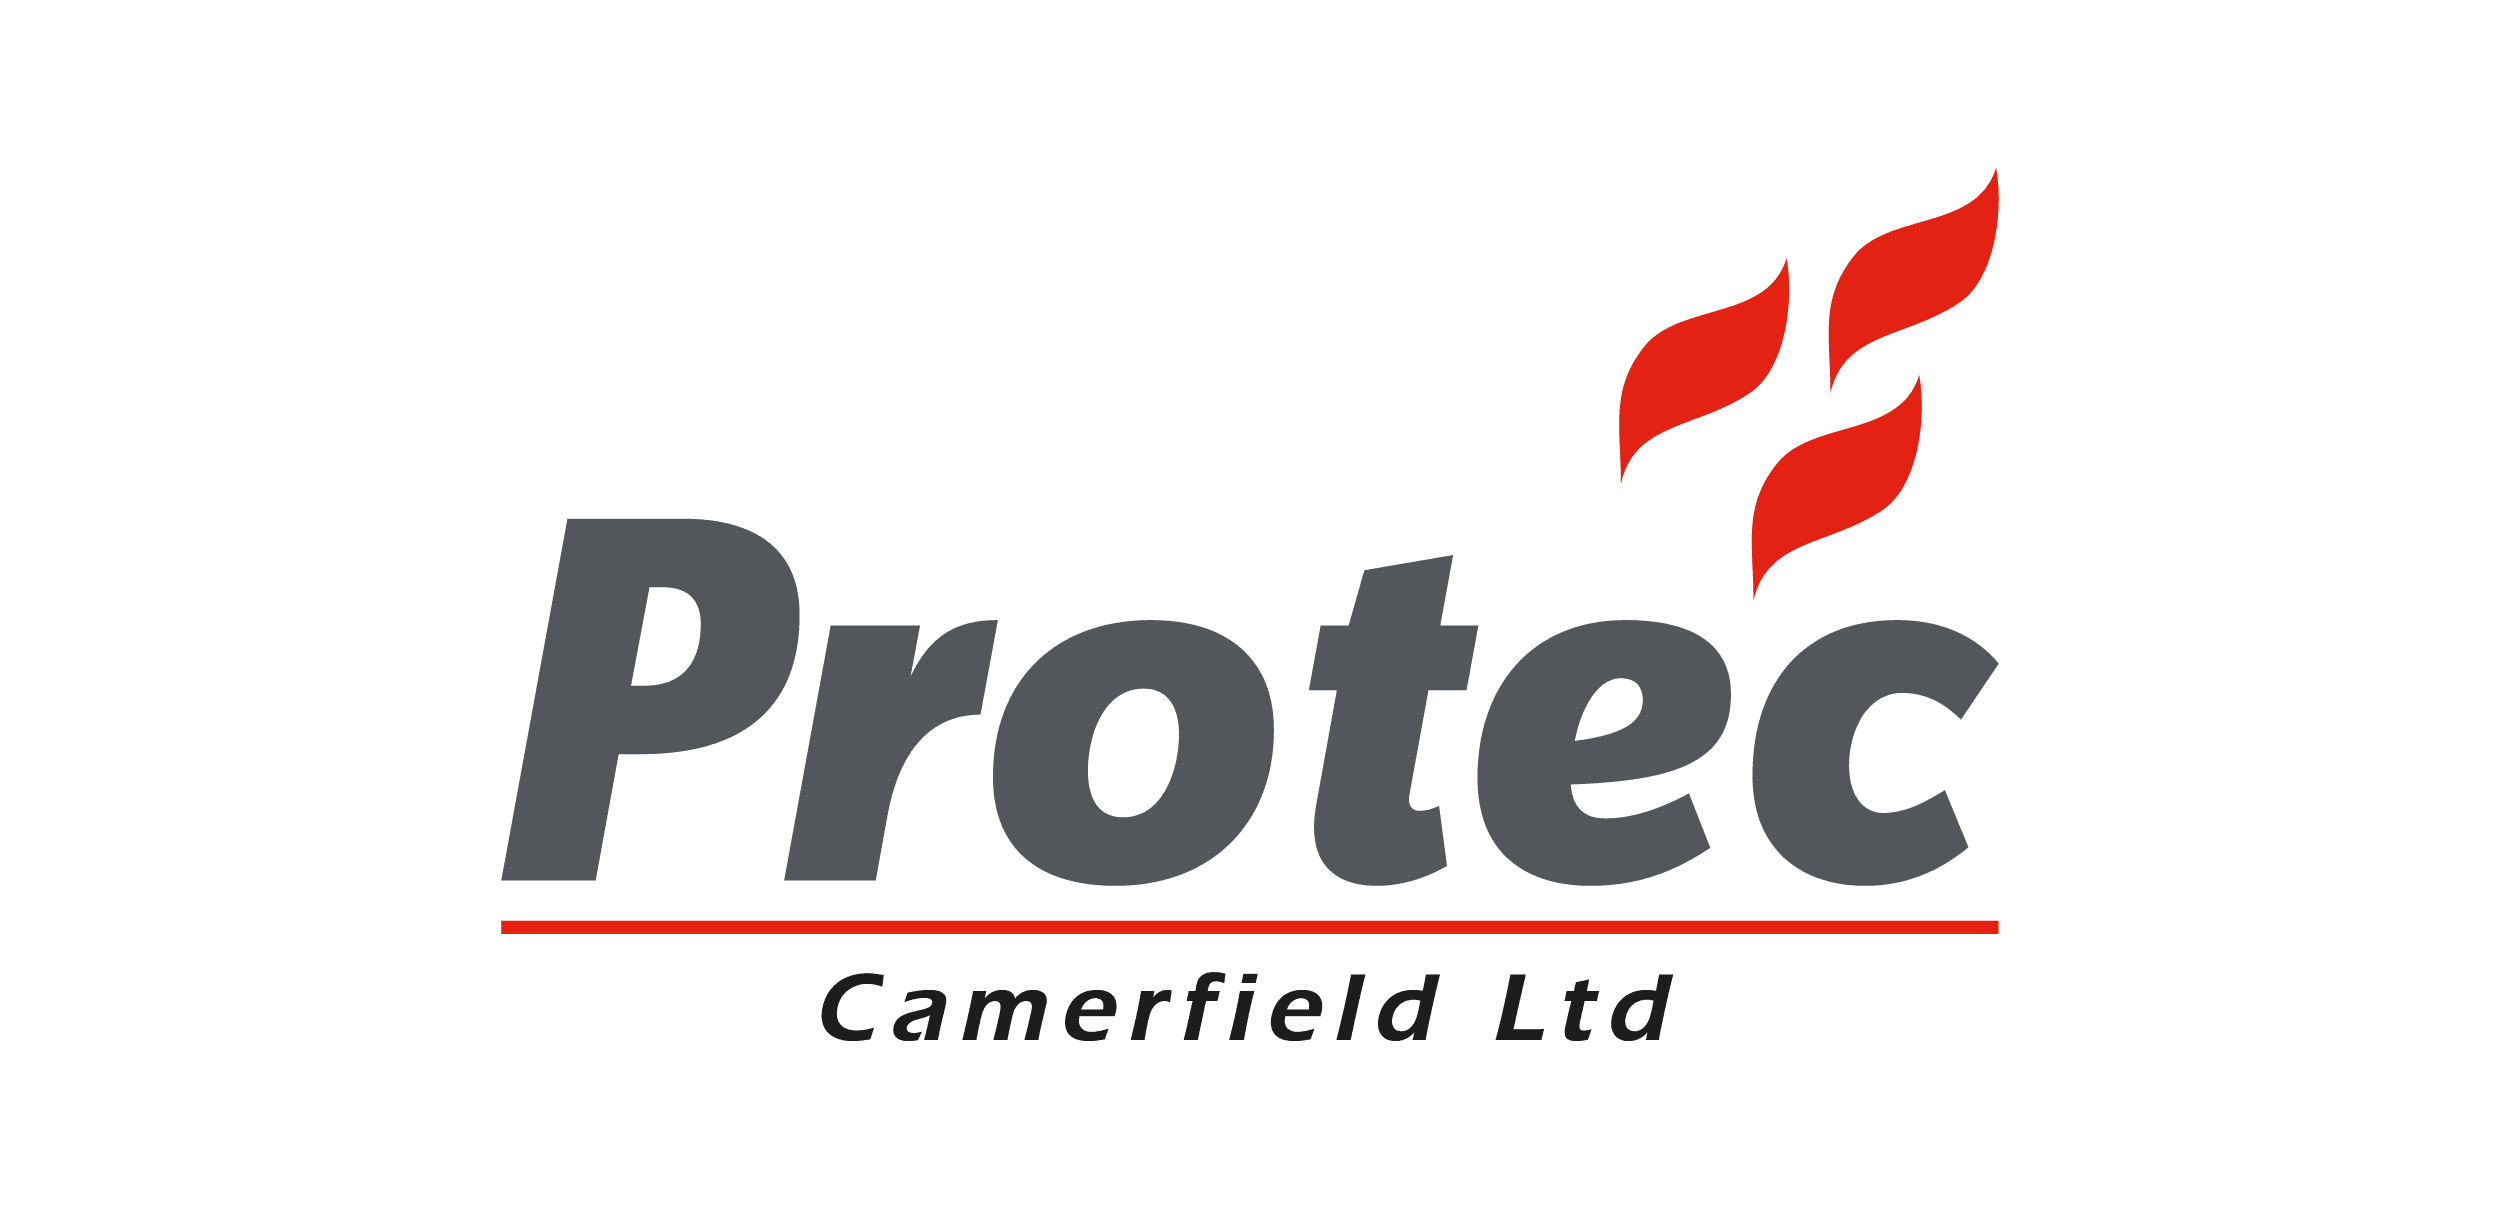 Camerfield - Home page